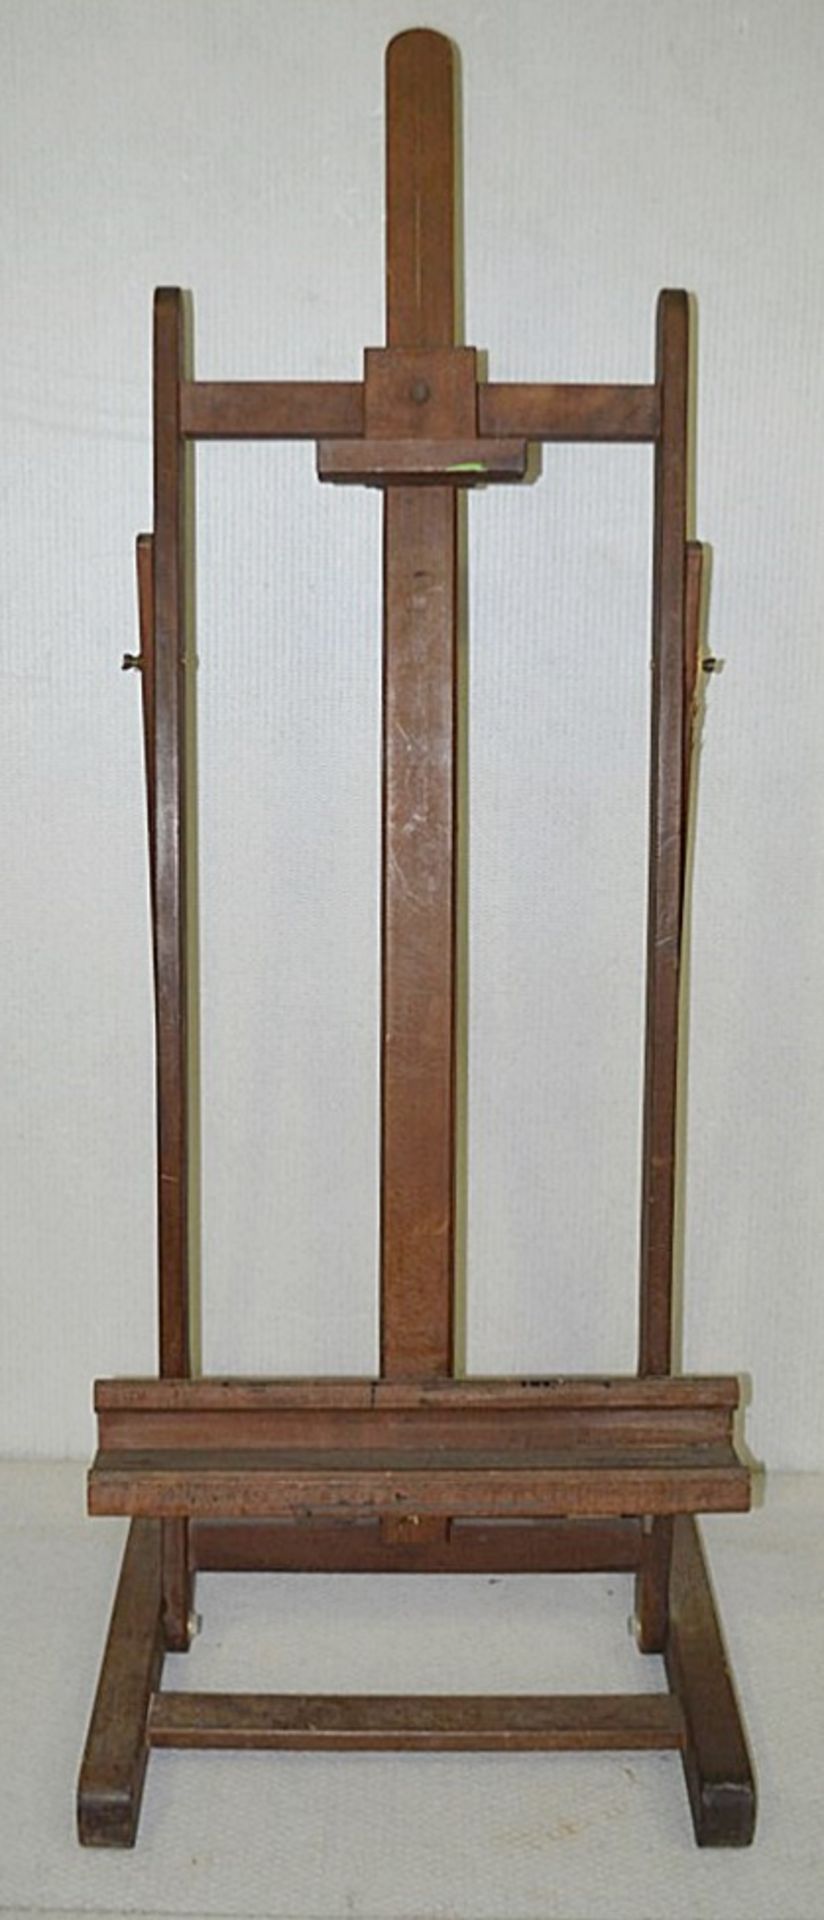 1 x Vintage Wooden Easel Display Prop - Dimensions (as pictured): H147 x W58 x D50cm - Ex-Showroom - Image 2 of 6